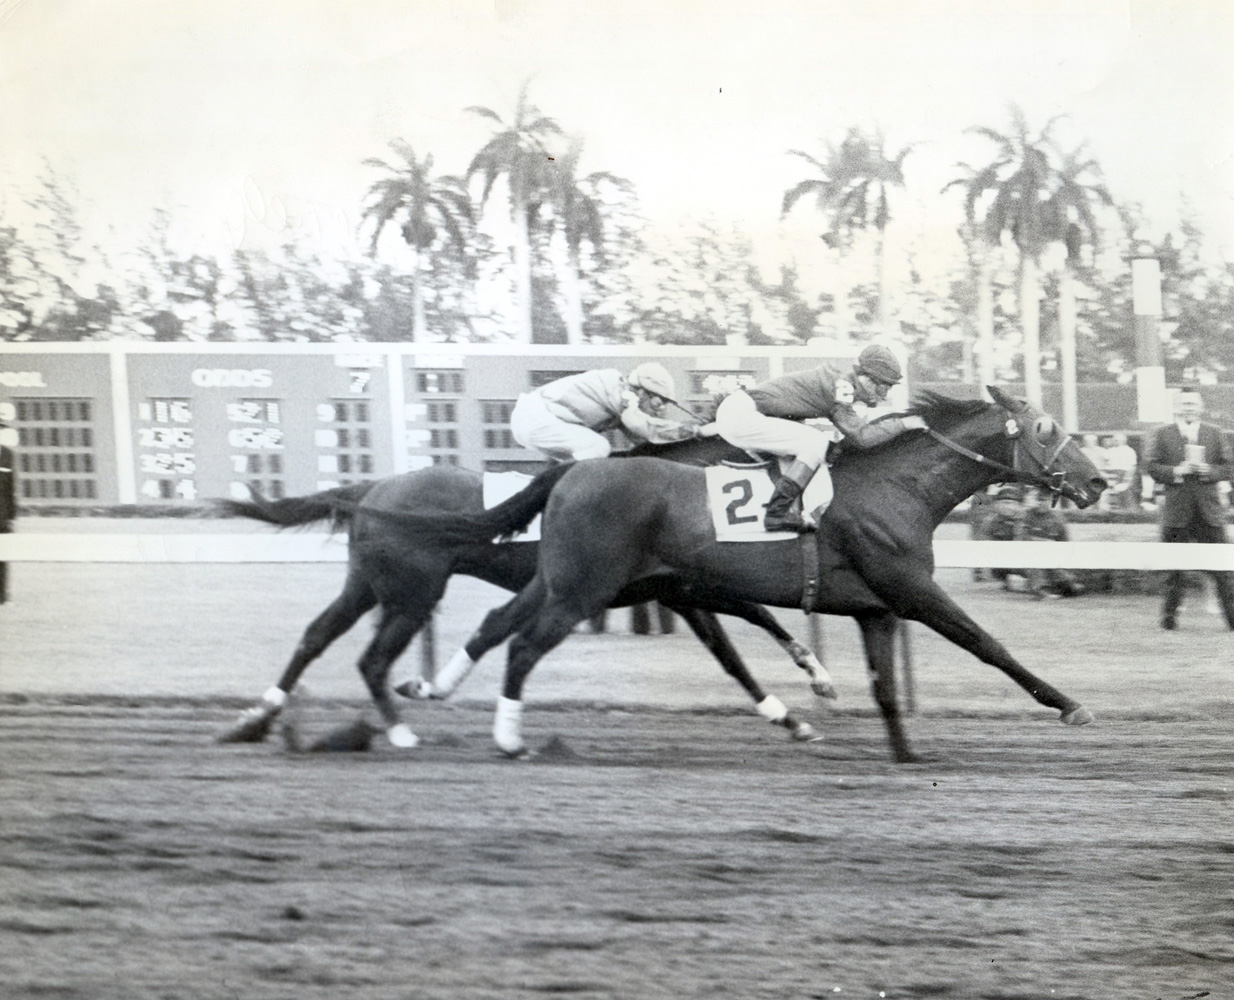 John Sellers and Yorky win the 1961 Widener Handicap at Hialeah Park (Leo Frutkoff/Museum Collection)